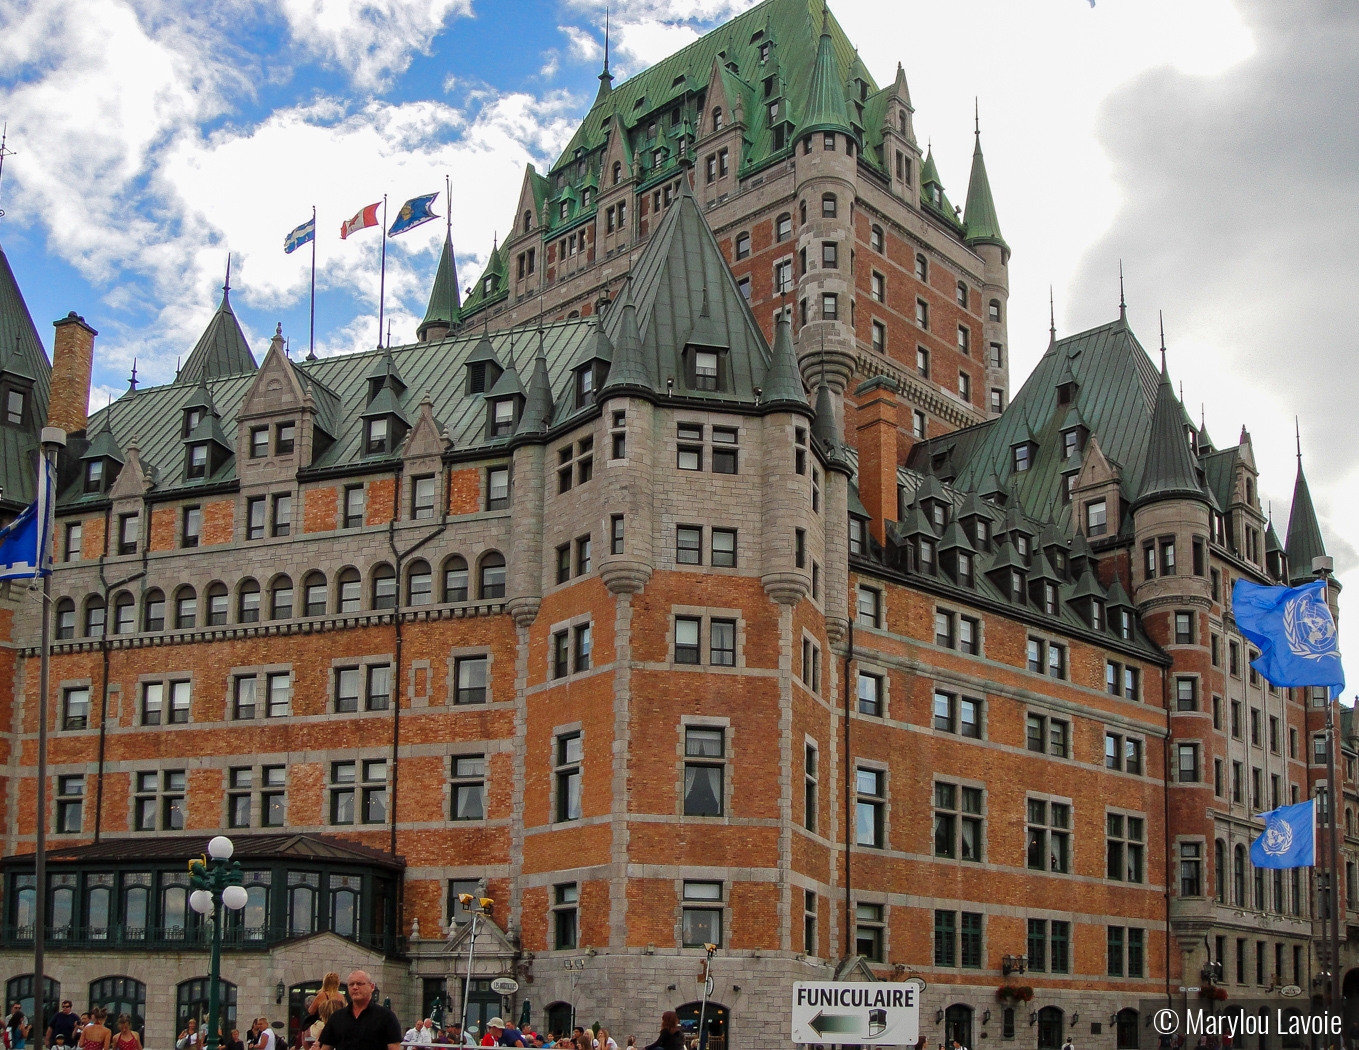 Hotel Frontenac by Marylou Lavoie